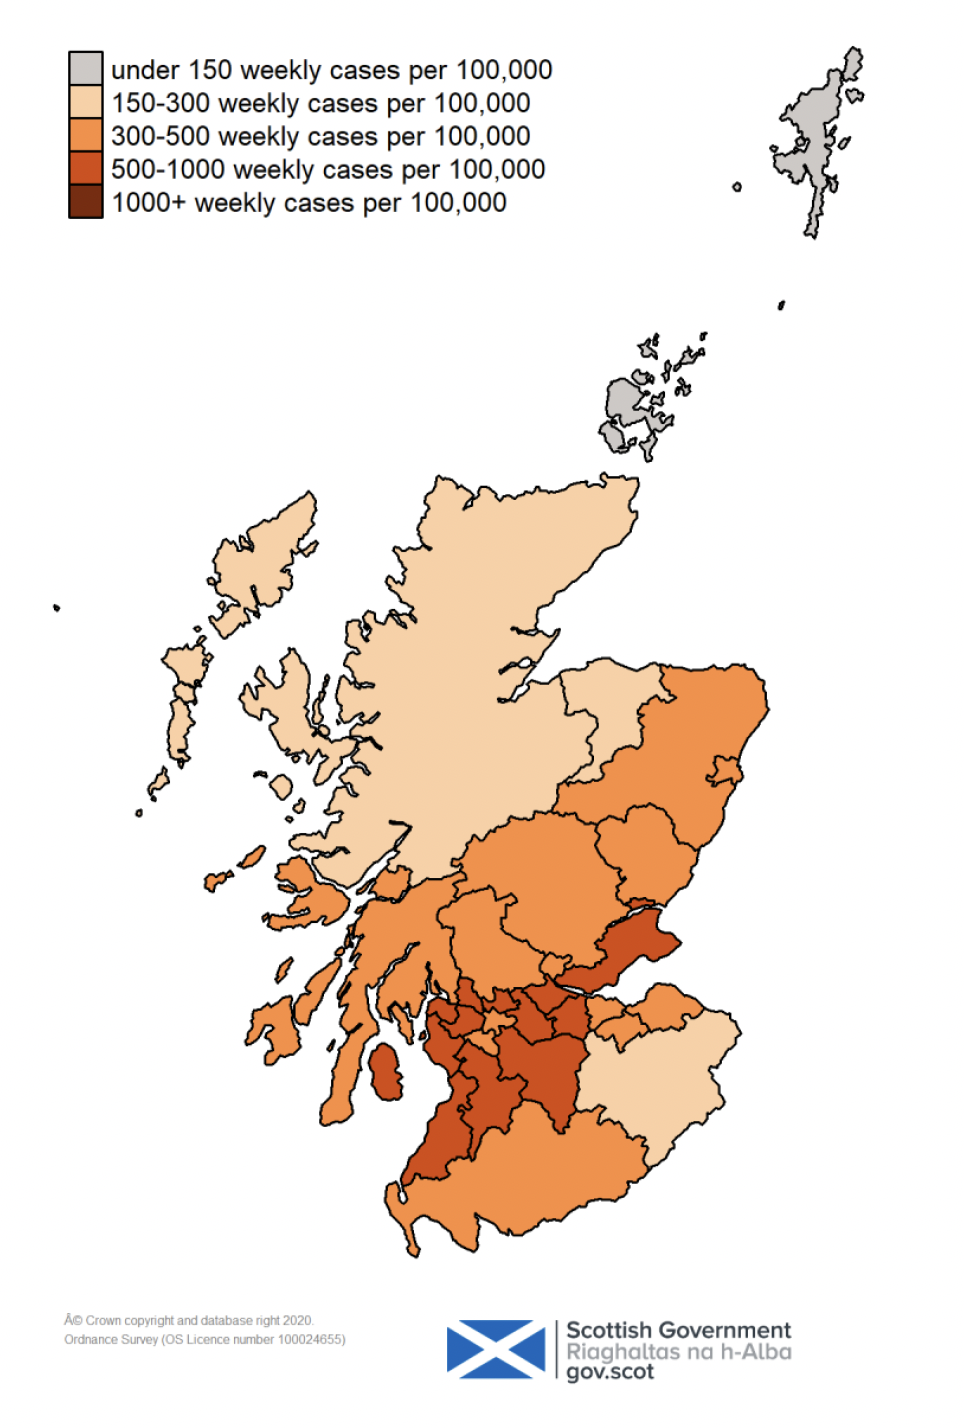 This colour coded map of Scotland shows the different rates of weekly positive cases per 100,000 people across Scotland’s Local Authorities. The colours range from grey for under 150 weekly cases per 100,000, through very light orange for 150 to 300, orange for 300-500, darker orange for 500-1,000, and very dark orange for over 1,000 weekly cases per 100,000 people. 

No local authorities are showing as very dark orange on the map this week, with over 1,000 weekly cases. Orkney and Shetland are shown as grey, with under 150 weekly cases per 100,000 people. Highland, Moray, Na h-Eileanan Siar and Scottish Borders are showing as very light orange with 150-300 weekly cases. Aberdeen,  Aberdeenshire, Angus, Argyll and Bute, City of Edinburgh, Clackmannanshire, 
Dumfries and Galloway, East Lothian, East Renfrewshire, Glasgow, Midlothian, Perth and Kinross and Stirling are showing as orange with 300-500 weekly cases per 100,000 people. All other local authorities are shown as darker orange with 500-1,000 weekly cases per 100,000.
